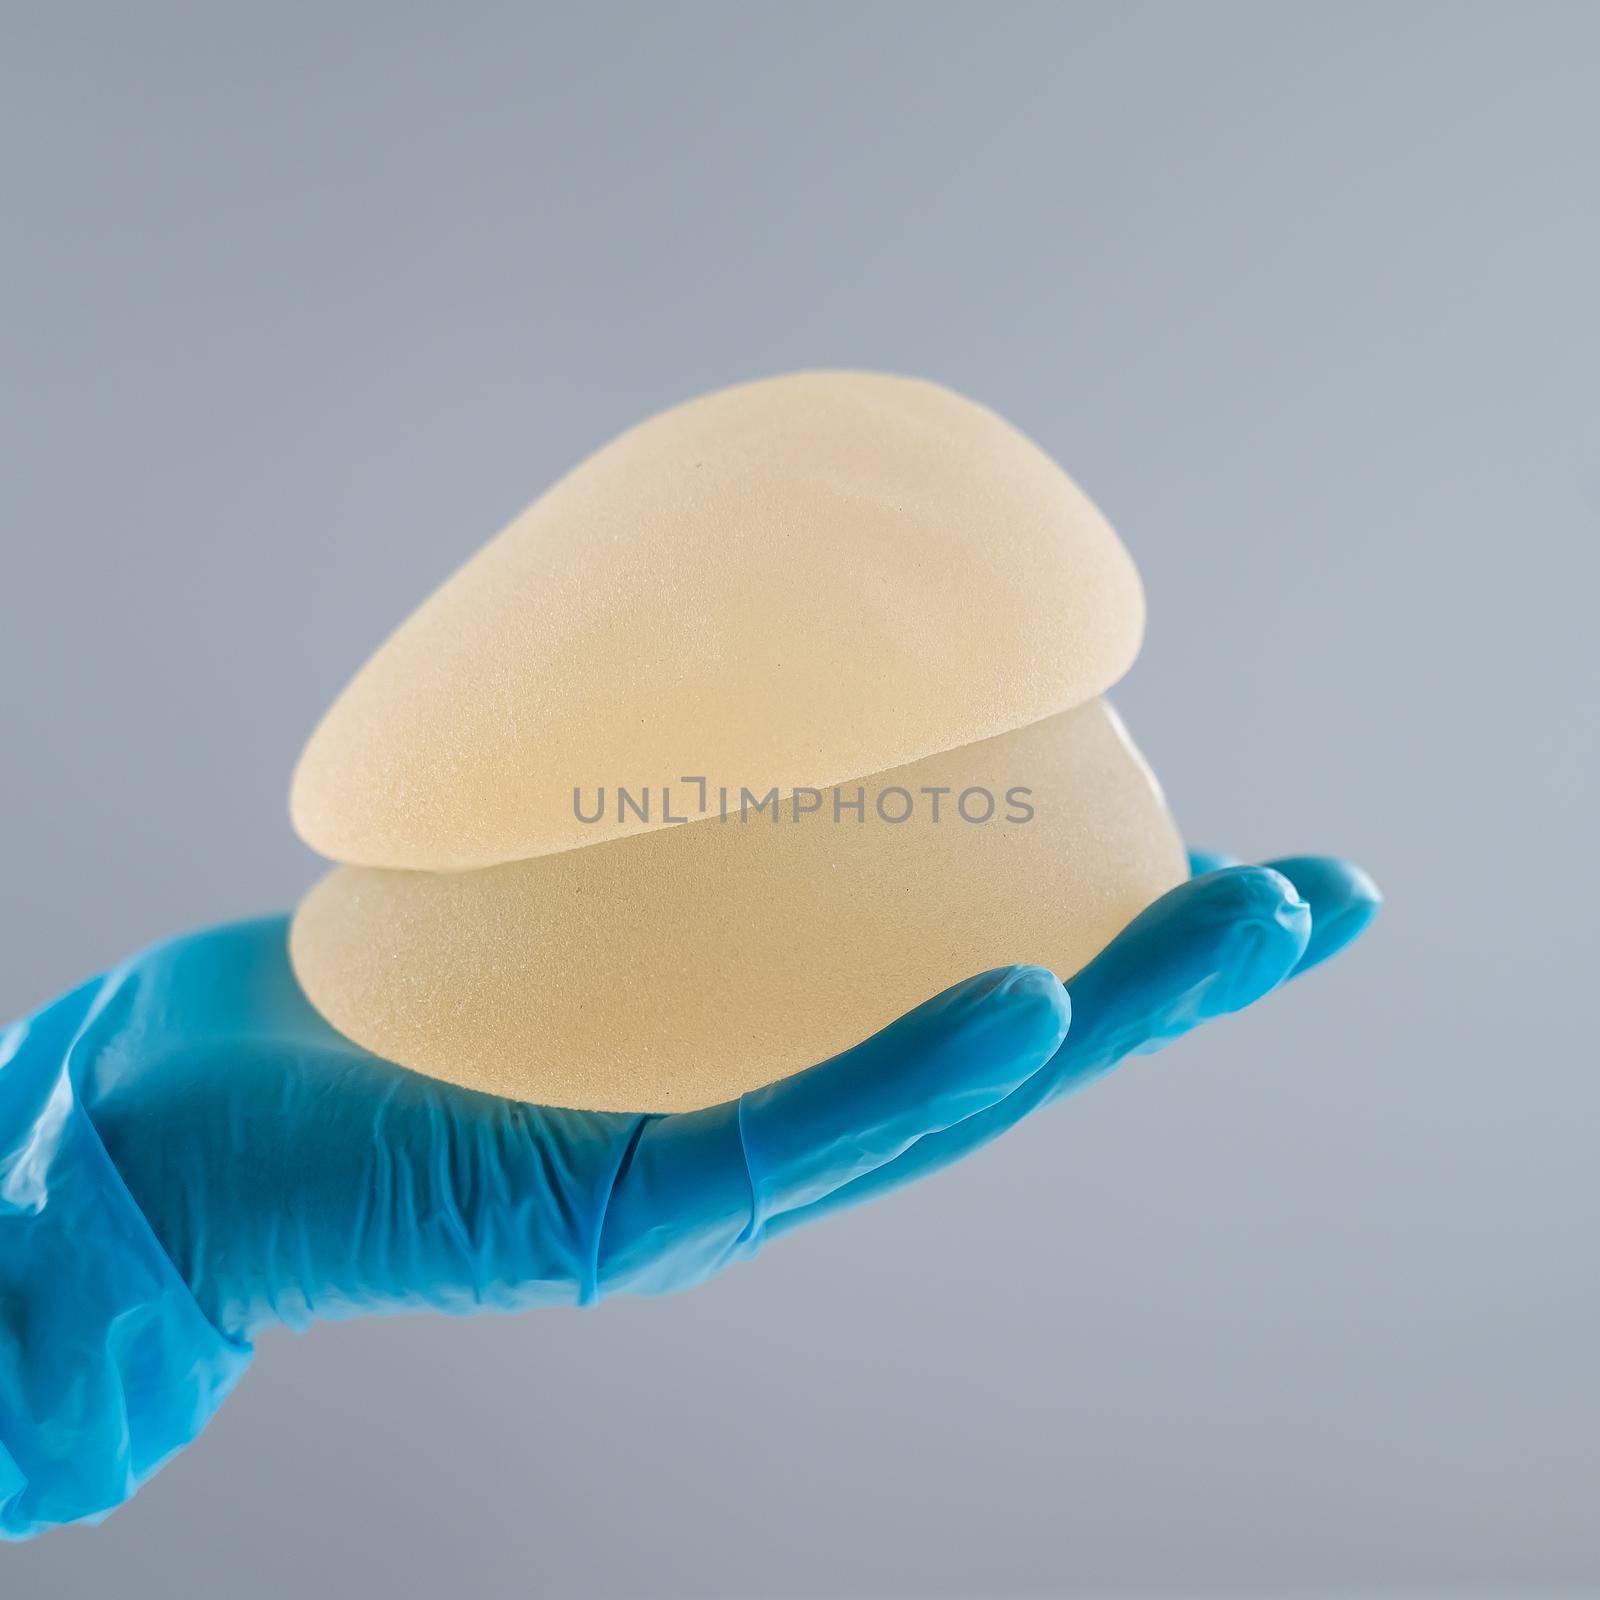 Doctor in a rubber glove holding a pile of breast implants. by mrwed54